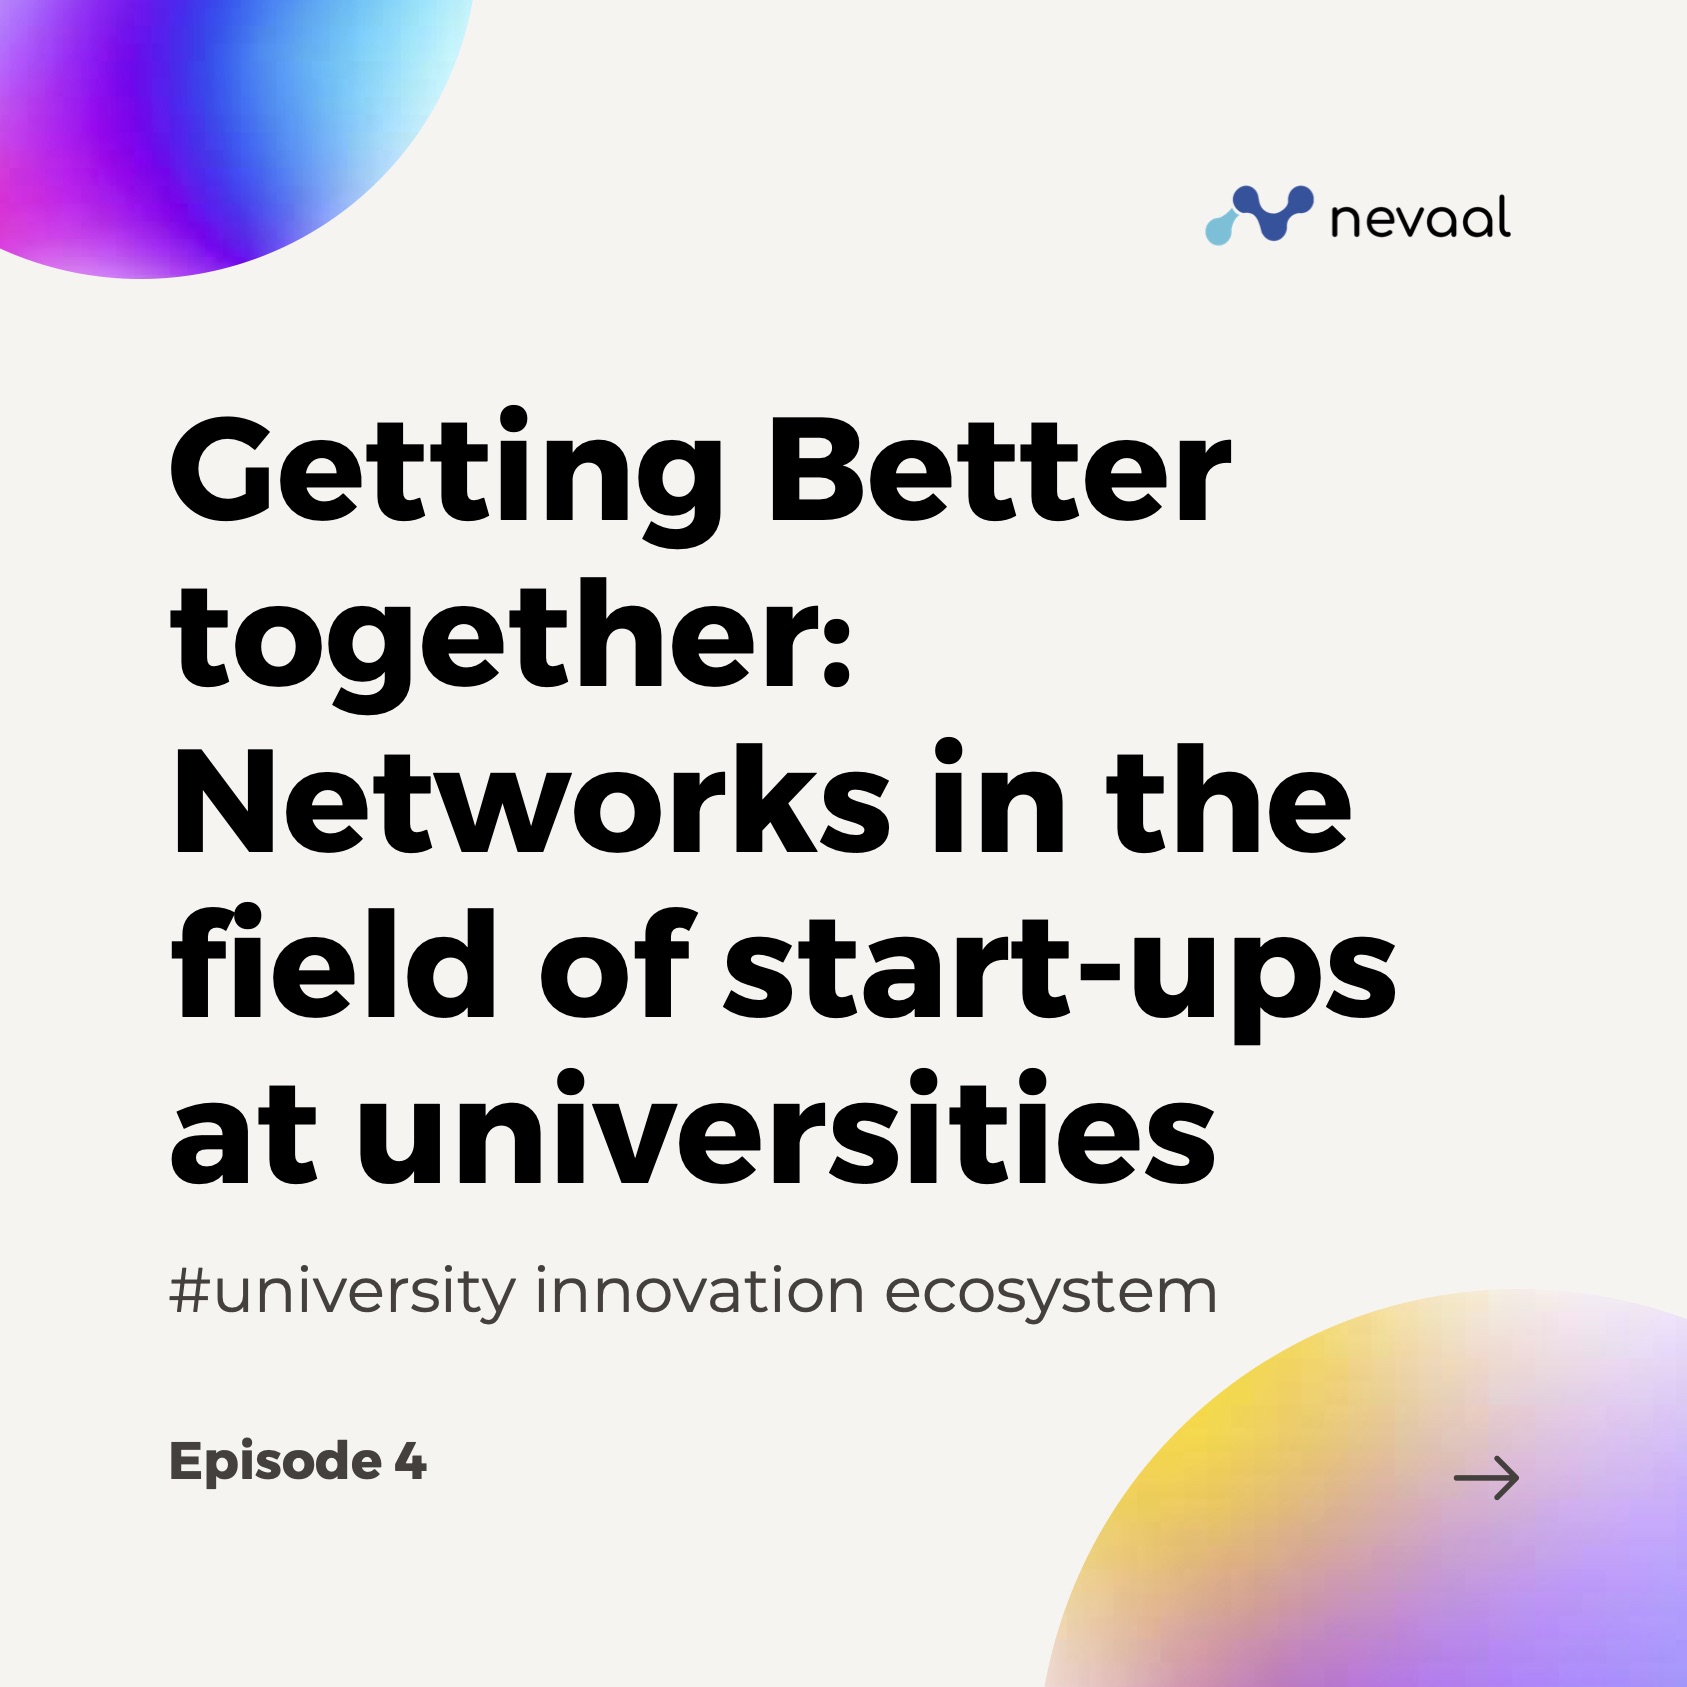 A beige cover image titled ‘Getting better together: networks in the field of start-ups at Universities’ with a nevaal logo